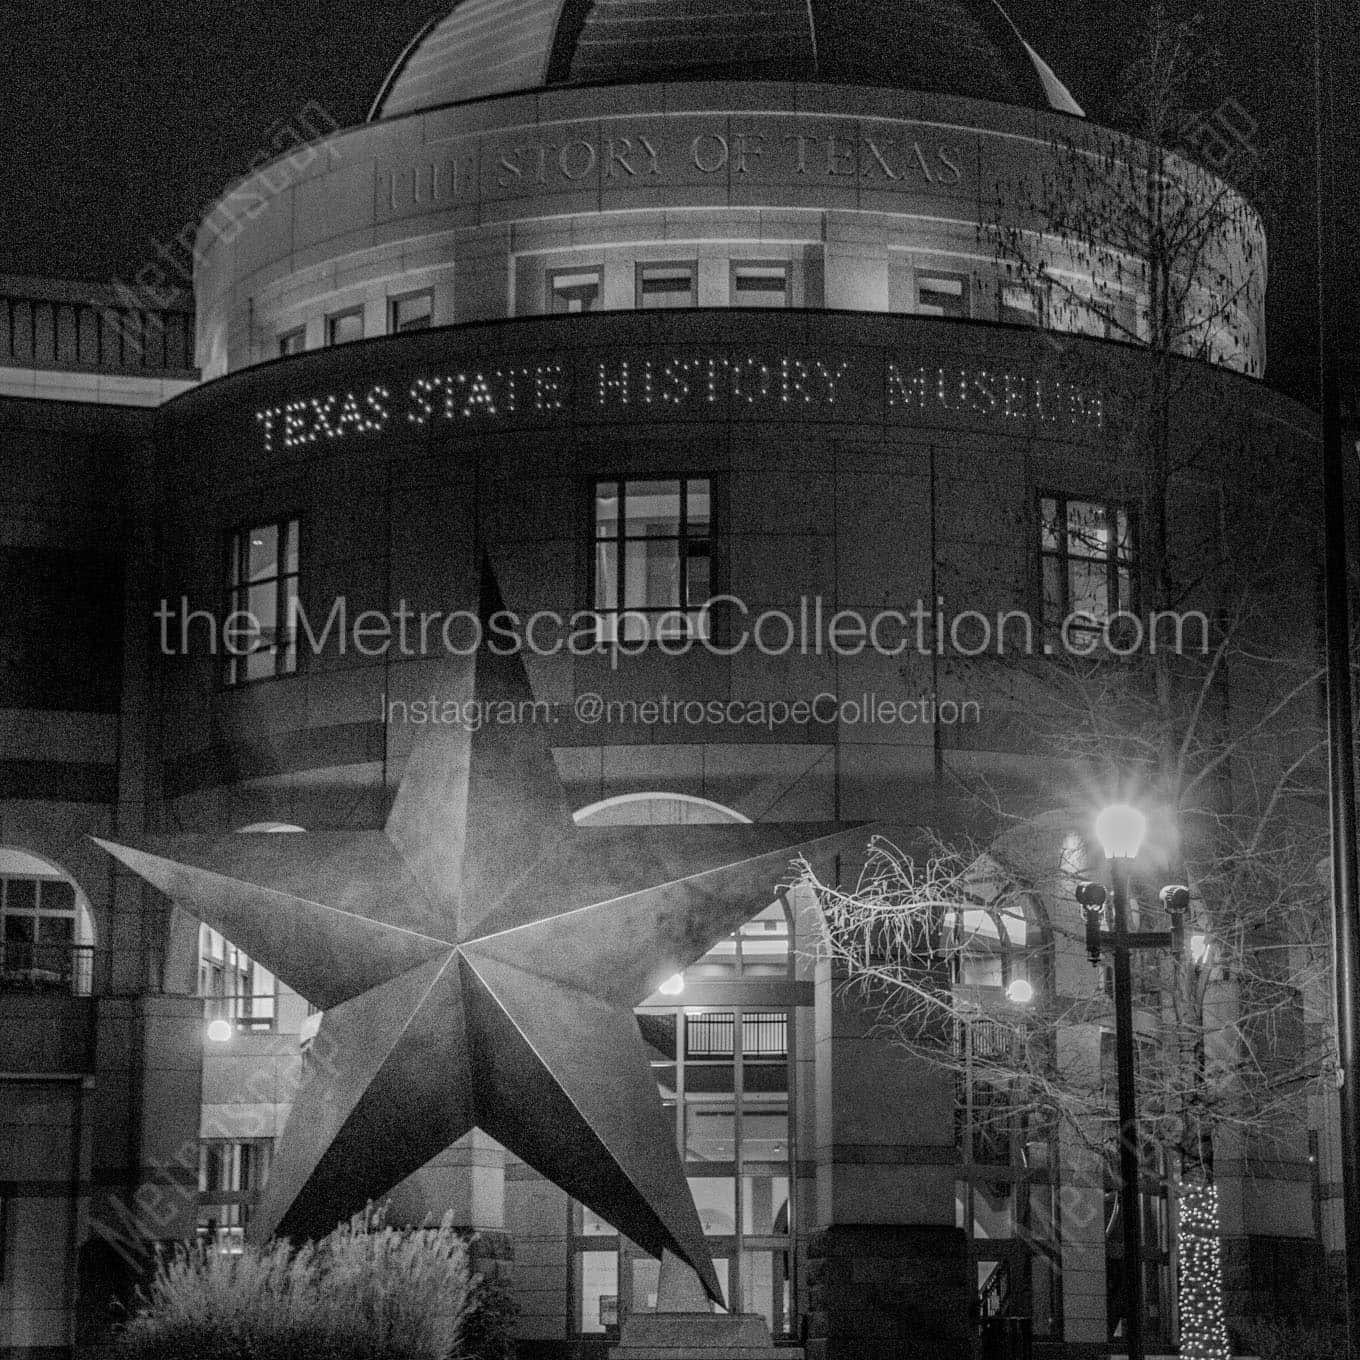 texas state history museum at night Black & White Wall Art